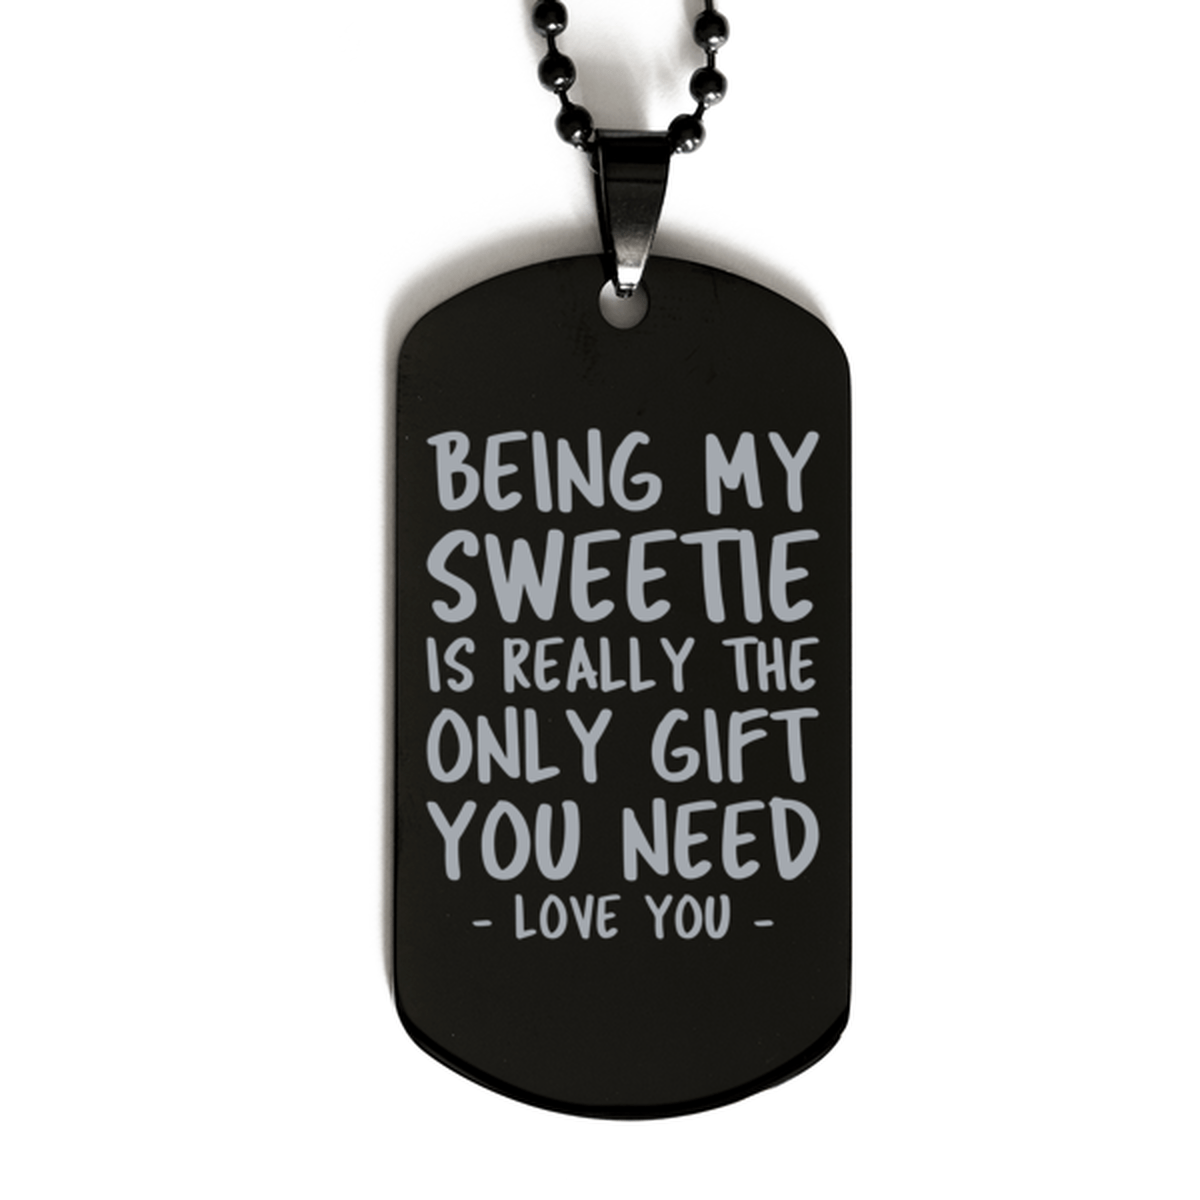 Funny Sweetie Black Dog Tag Necklace, Being My Sweetie Is Really the Only Gift You Need, Best Birthday Gifts for Sweetie